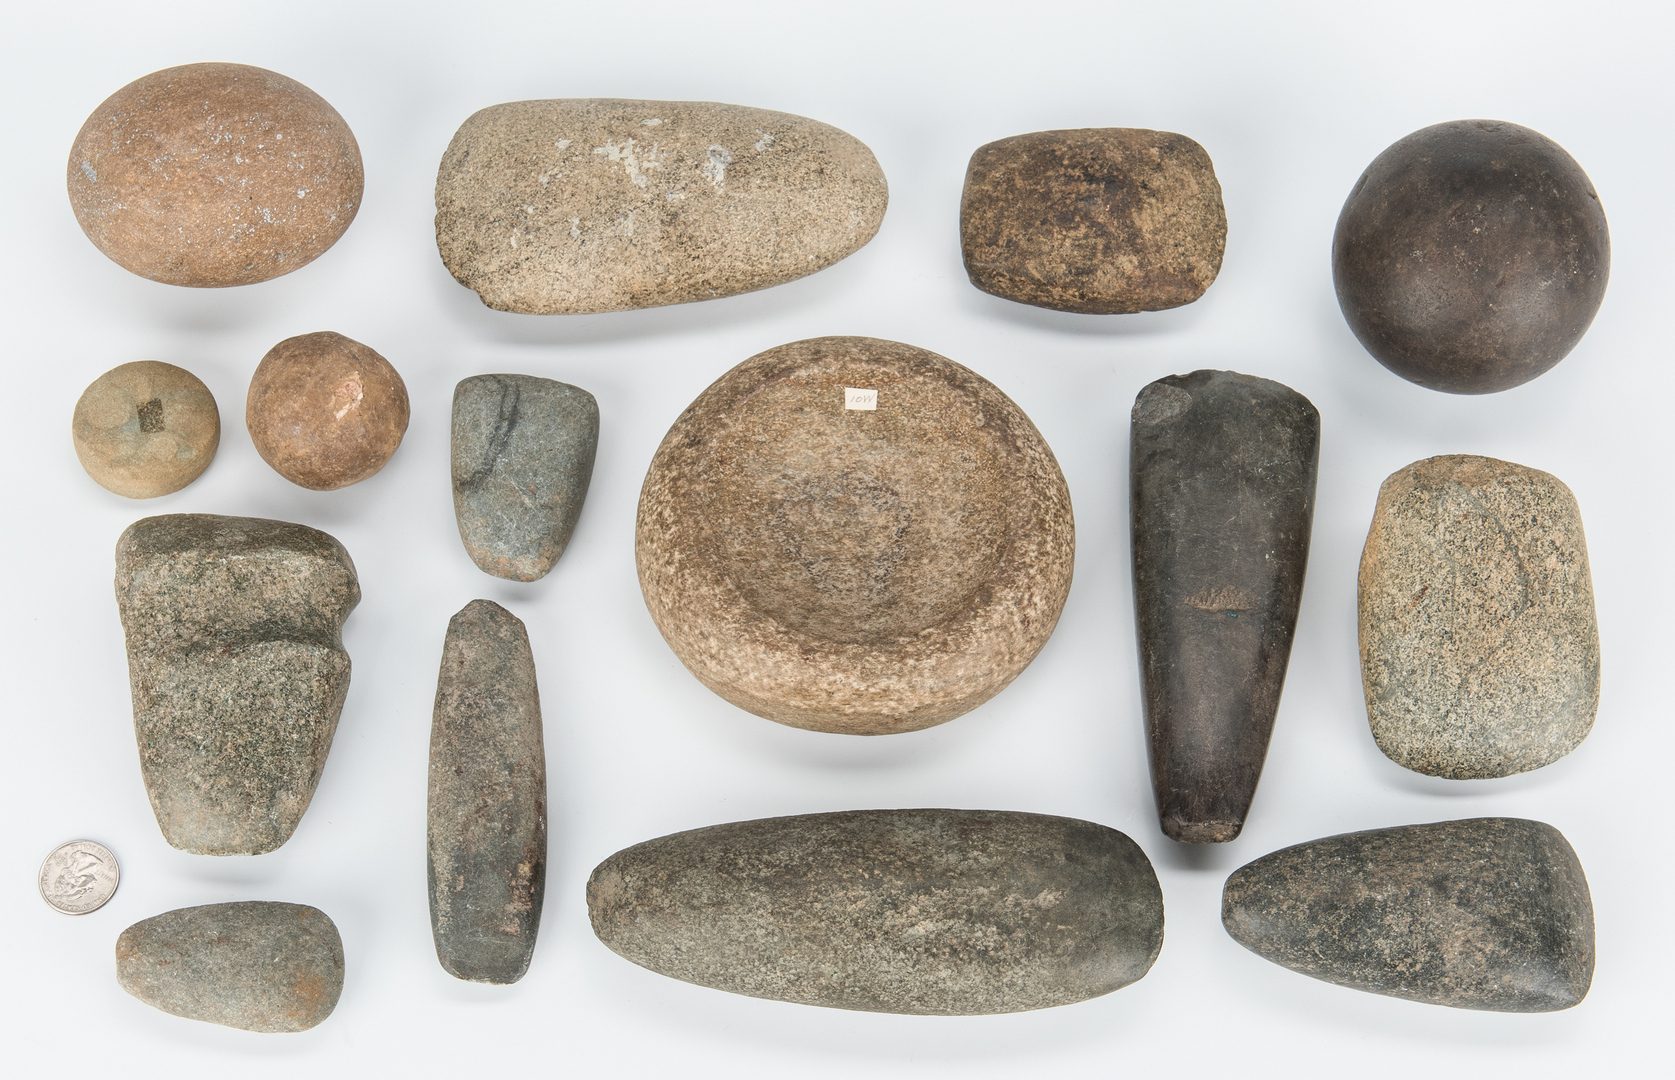 Lot 282: 15 Native American Stone Artifacts, incl. Discoidals